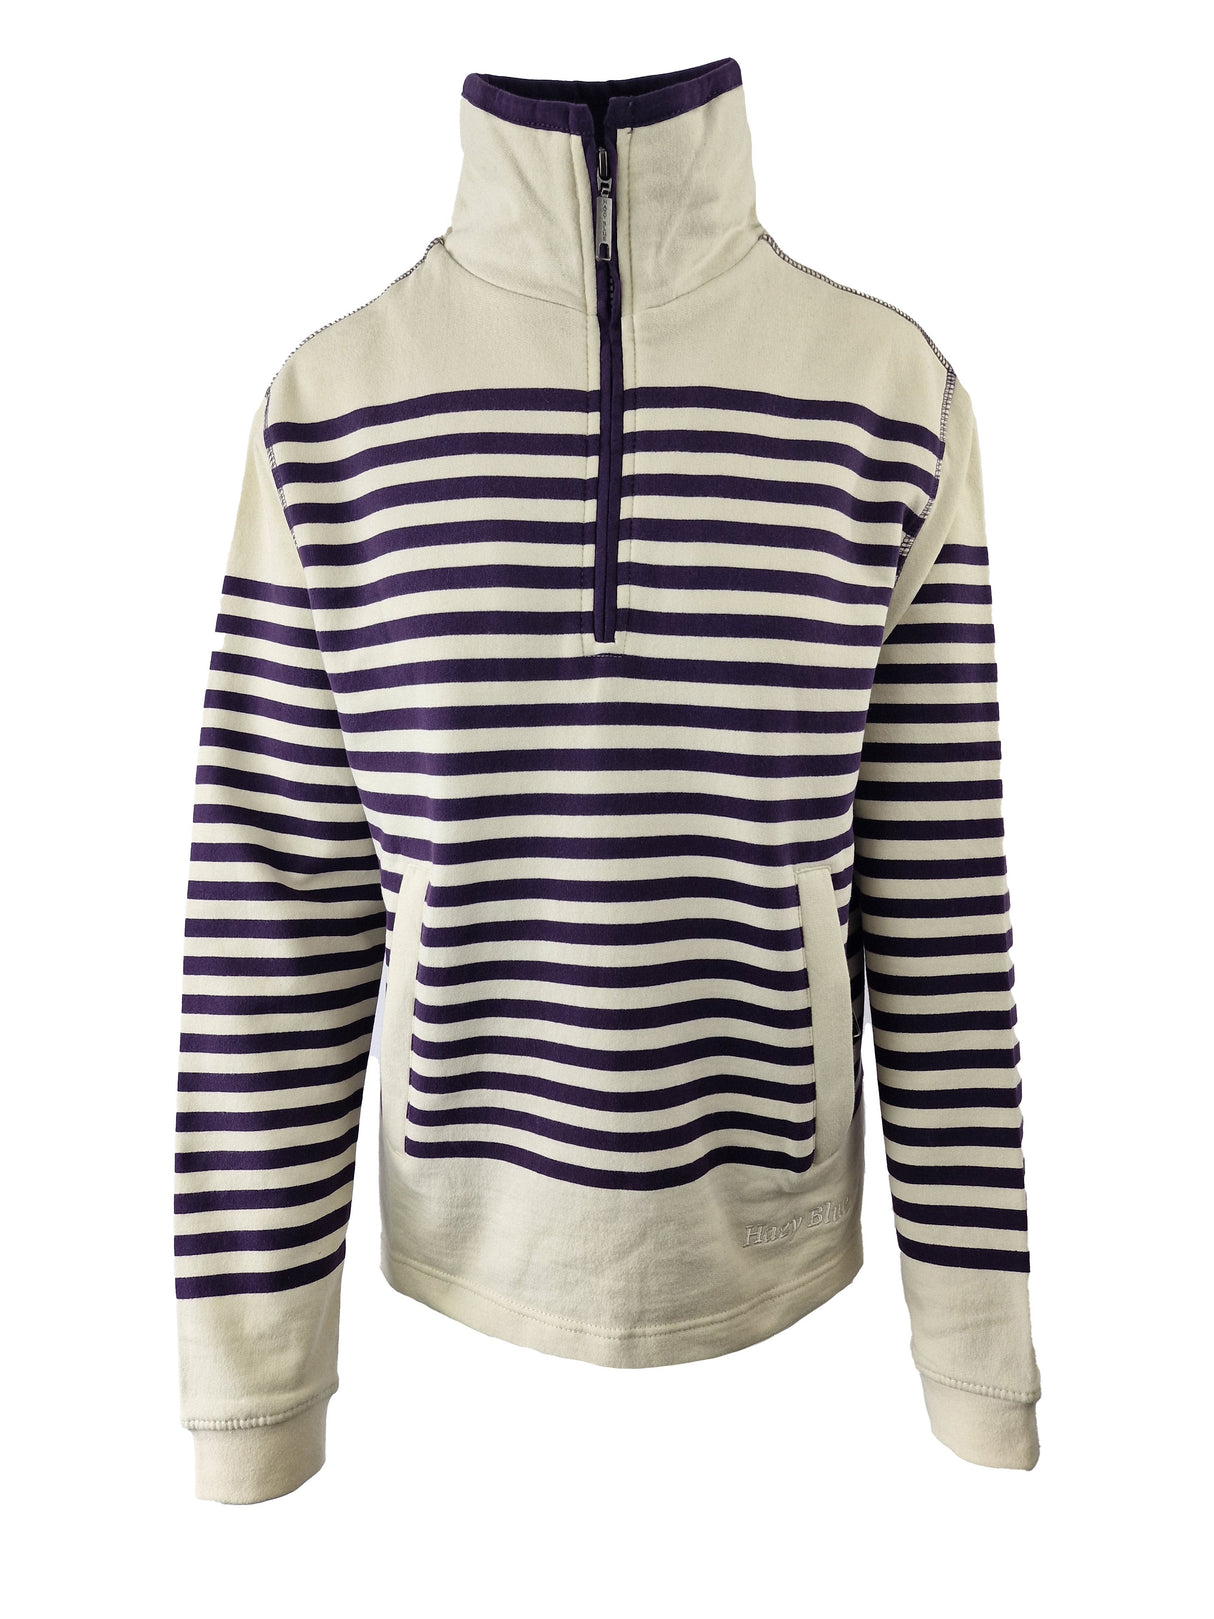 Hazy Blue Womens Pullover Sweatshirts - Grace - Just $29.90! Shop now at Warwickshire Clothing. Free Dellivery.